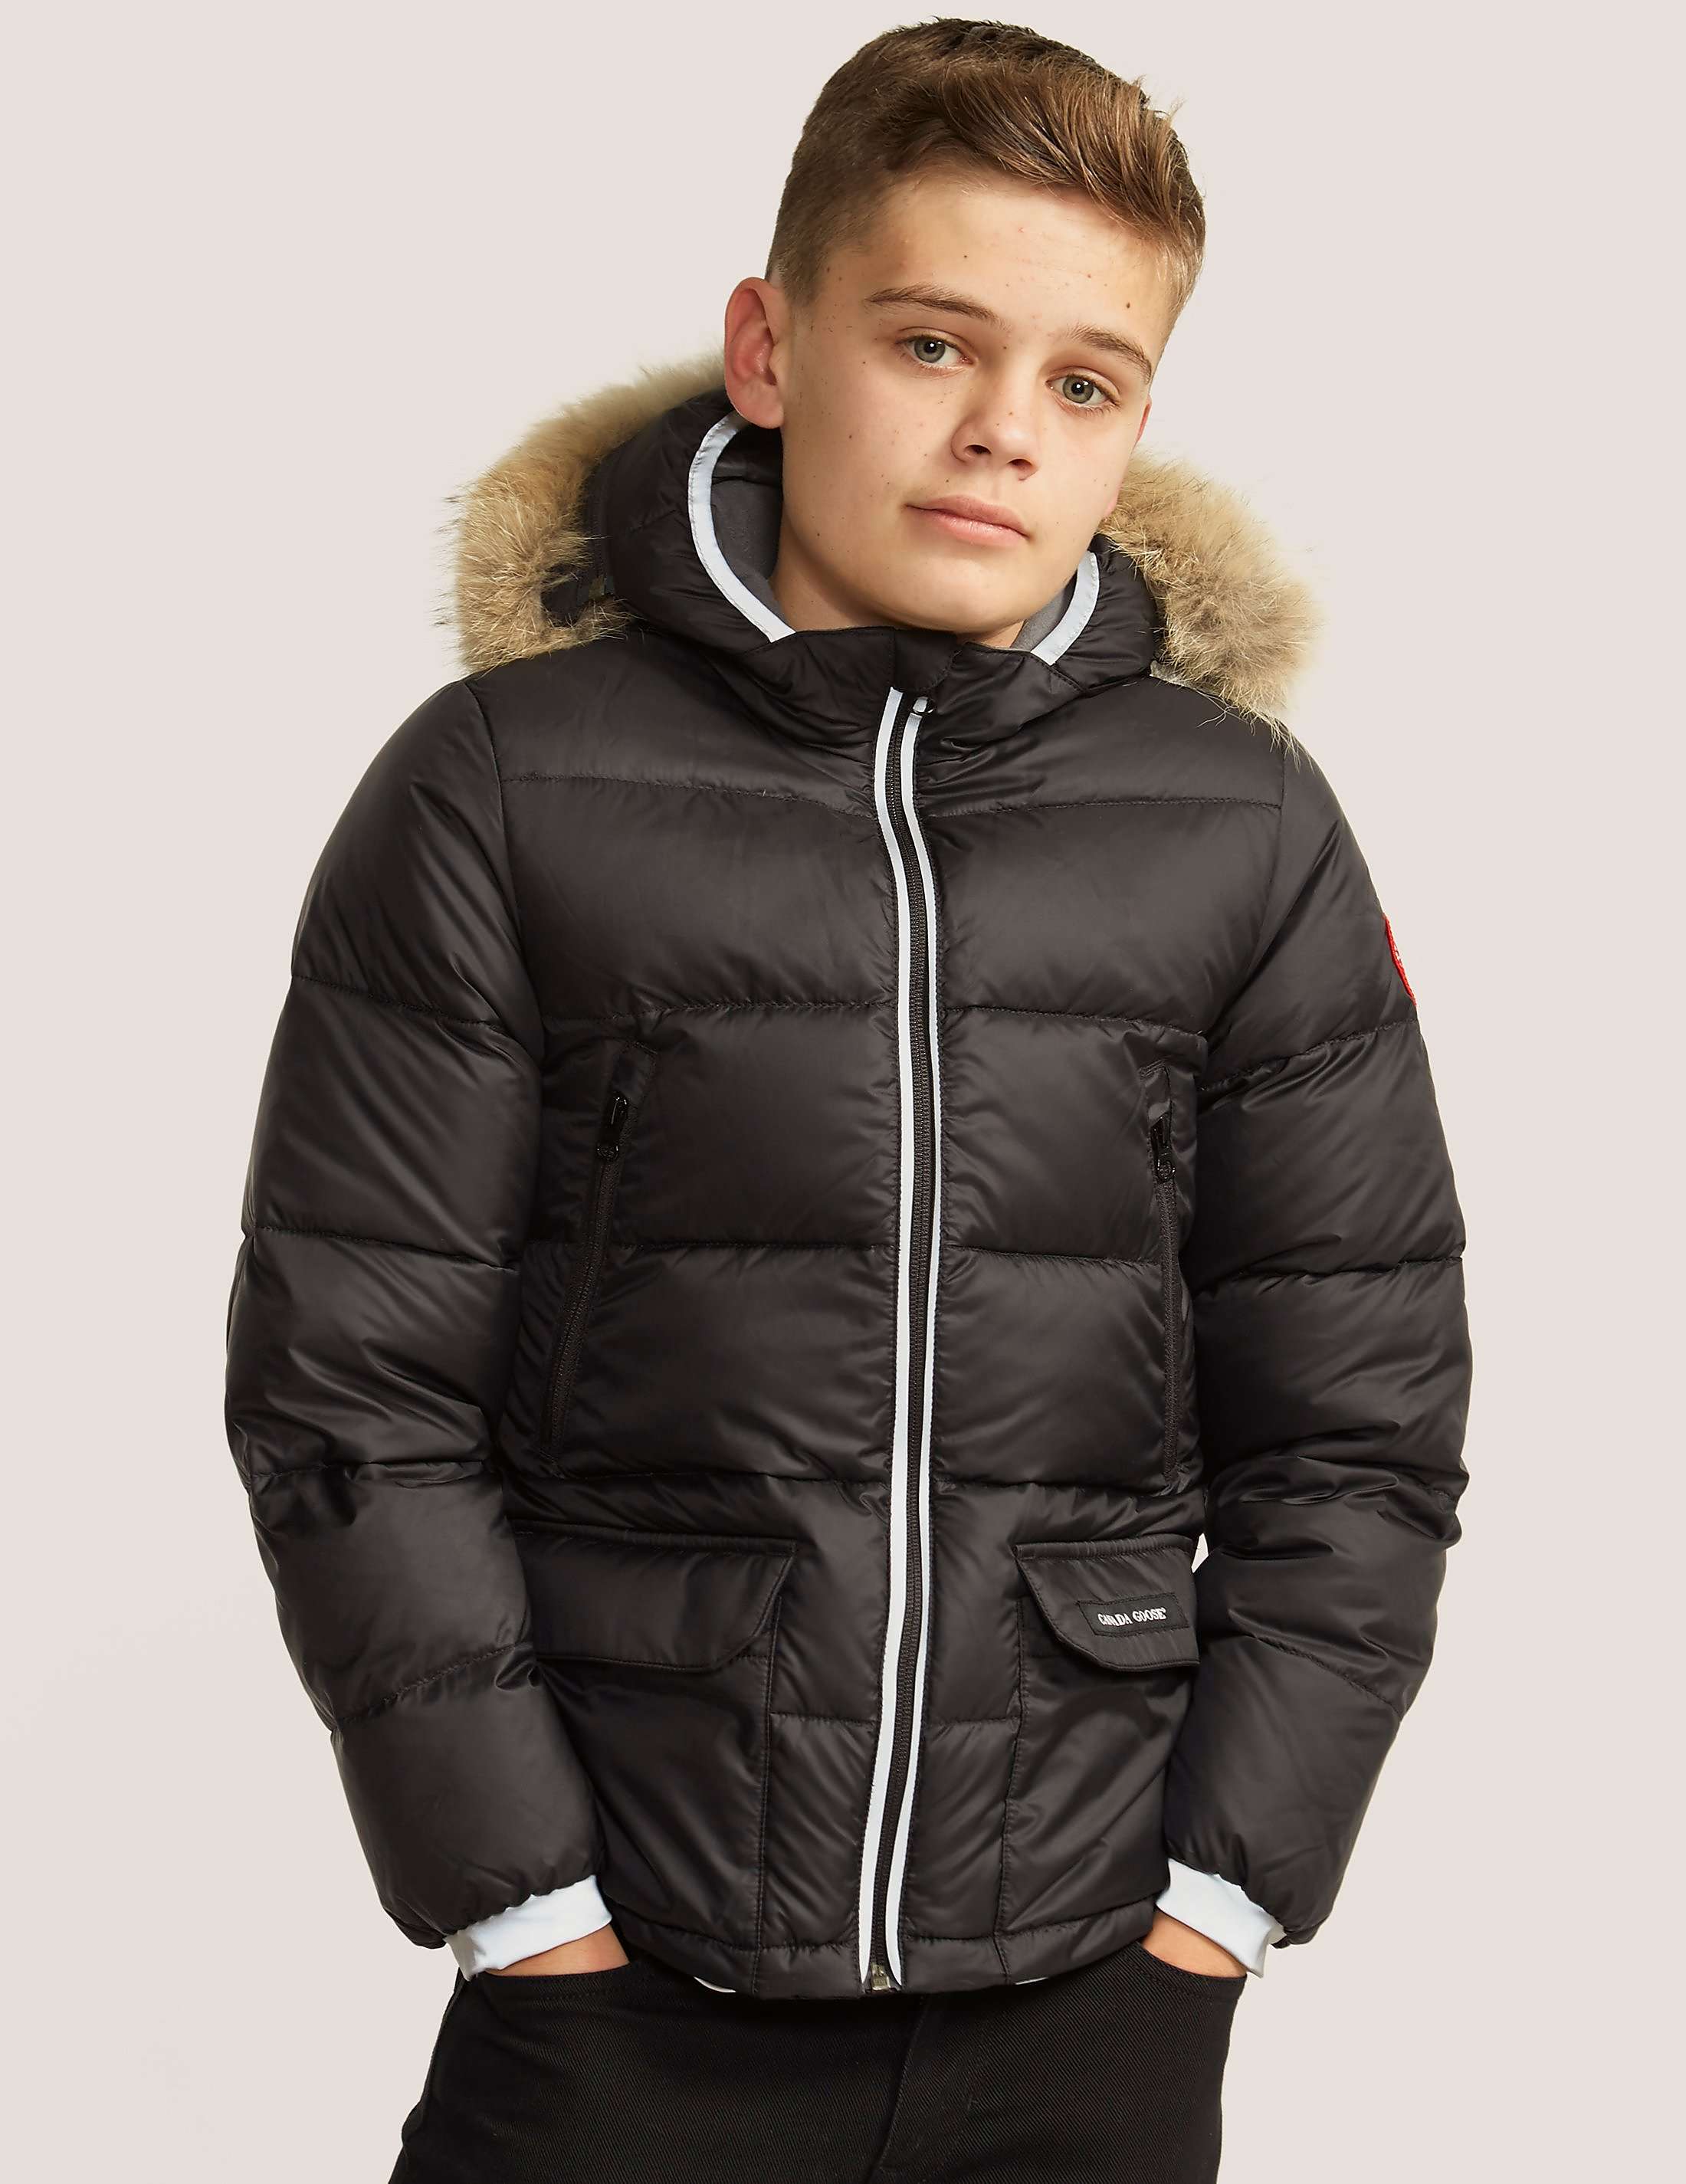 Canada Goose hats outlet fake - Canada Goose - Jackets & More | Kids | Tessuti